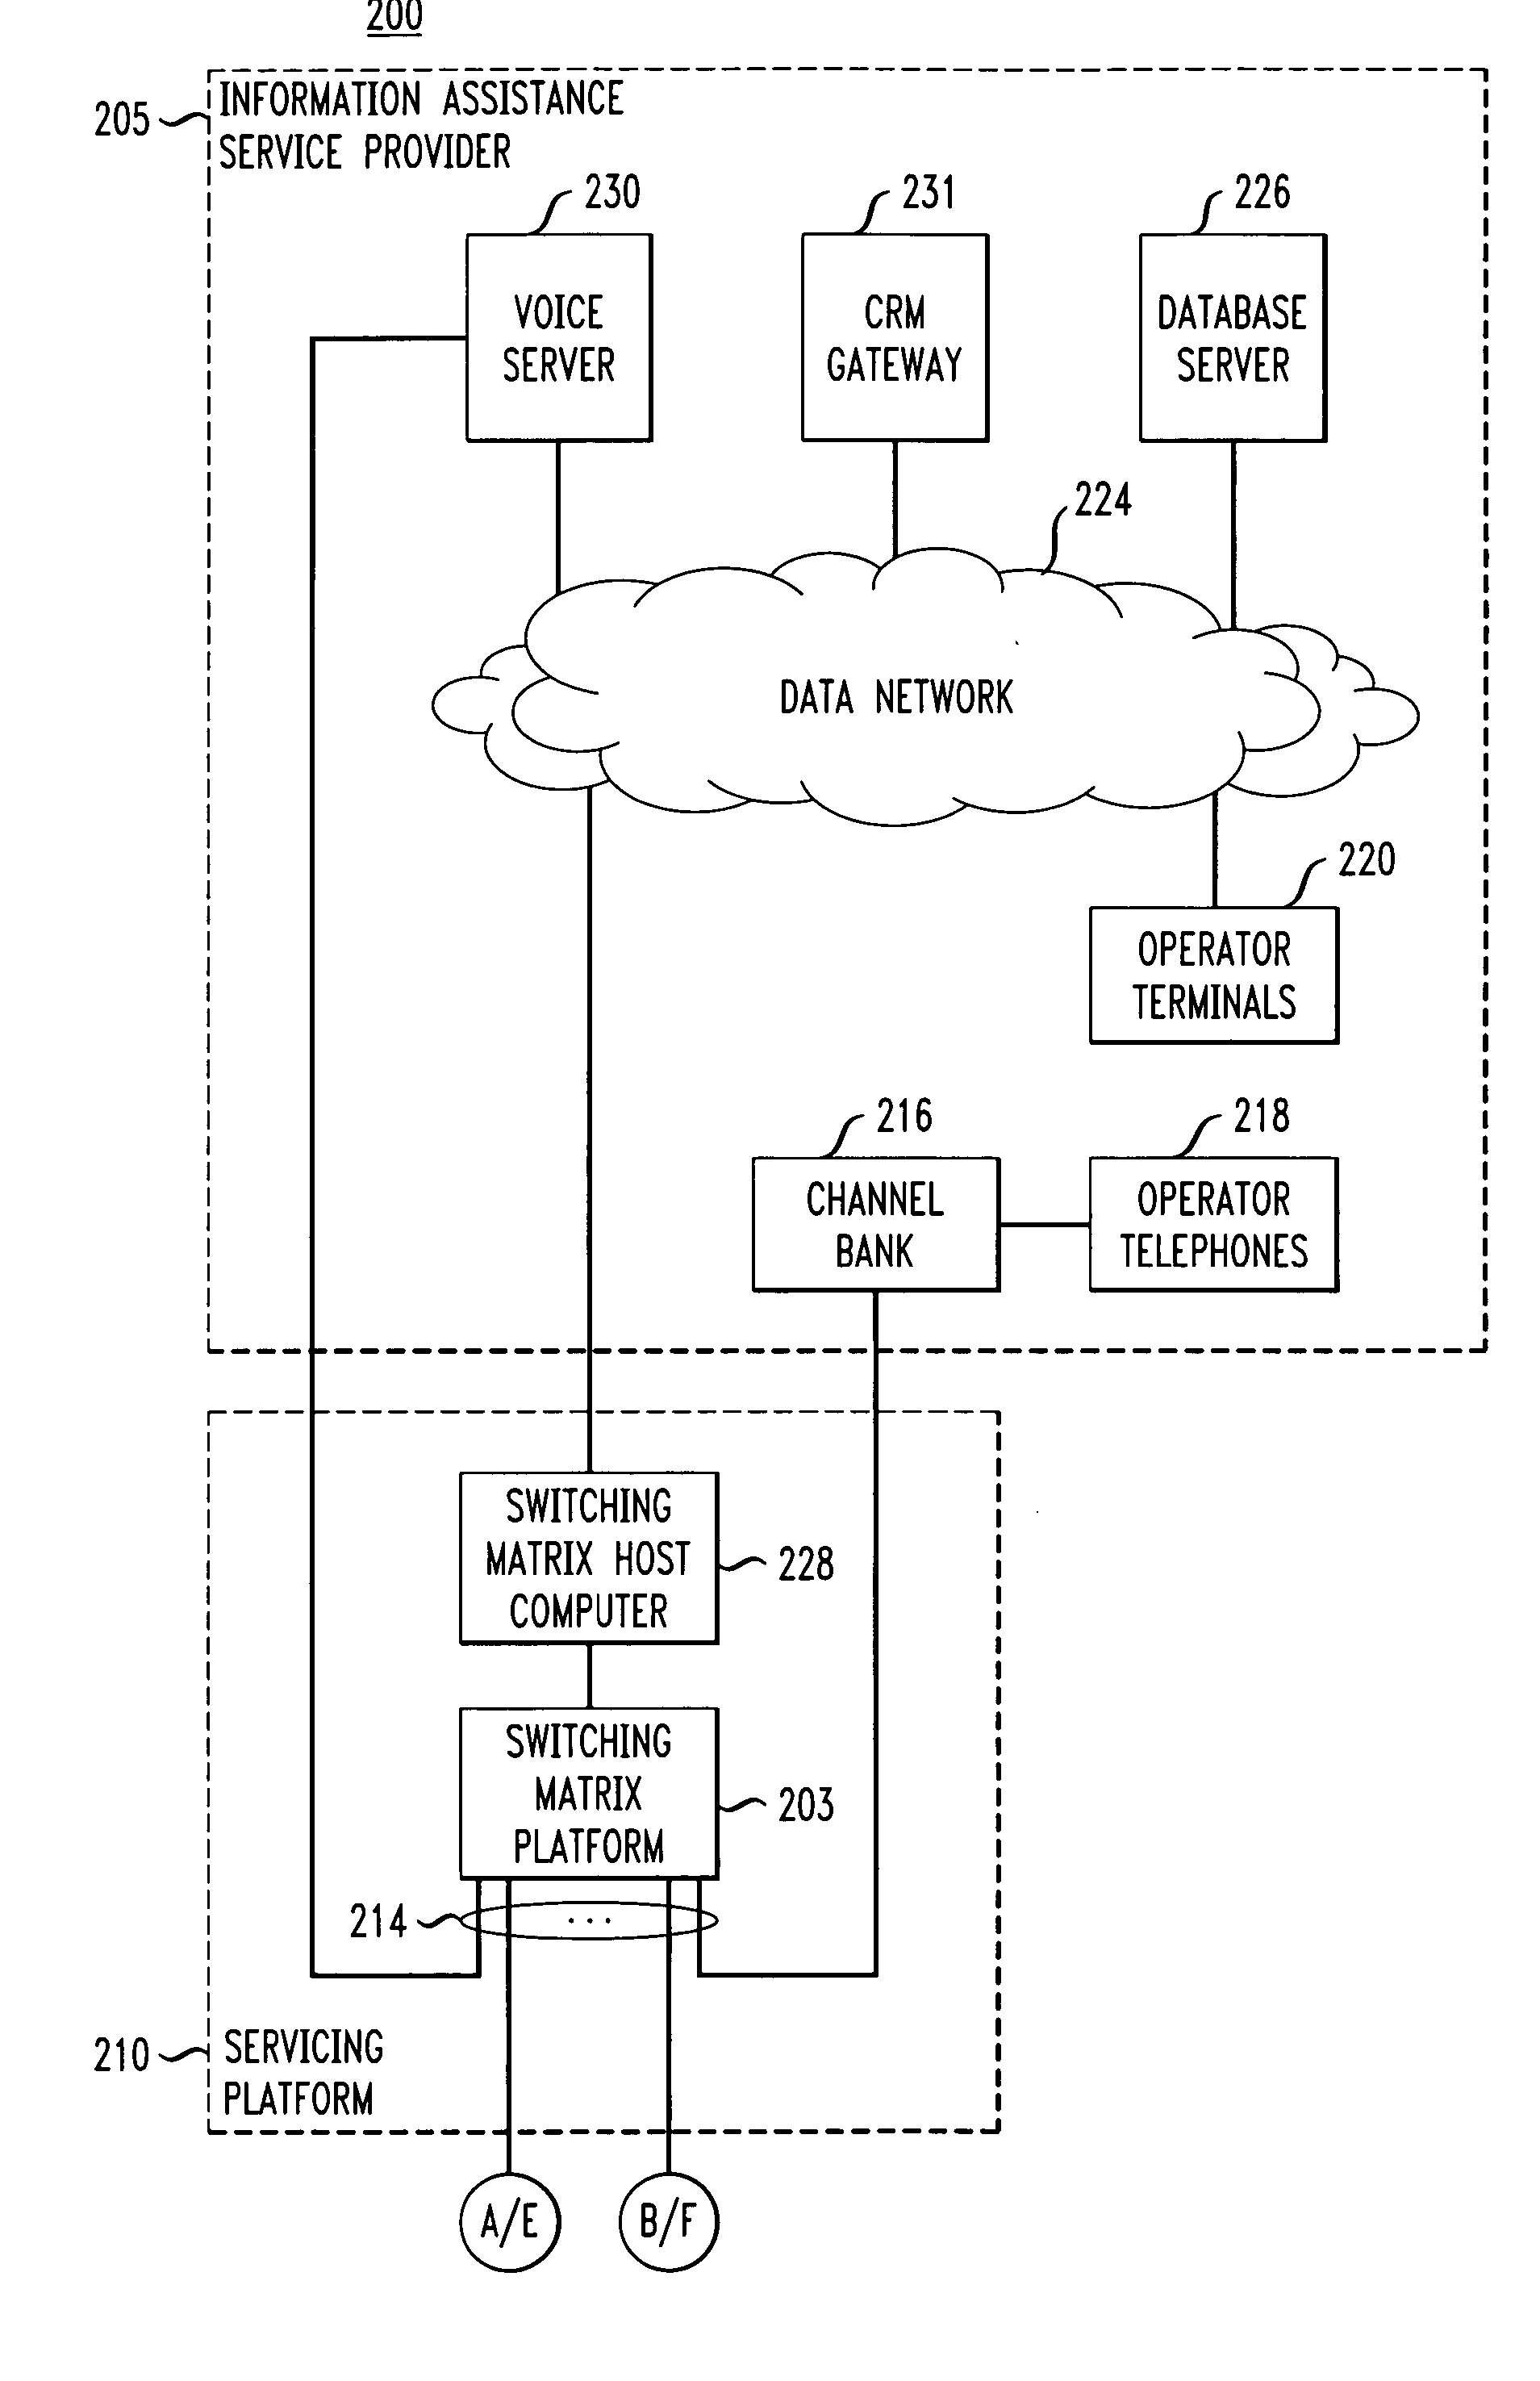 Technique for generating and accessing organized information through an information assistance service